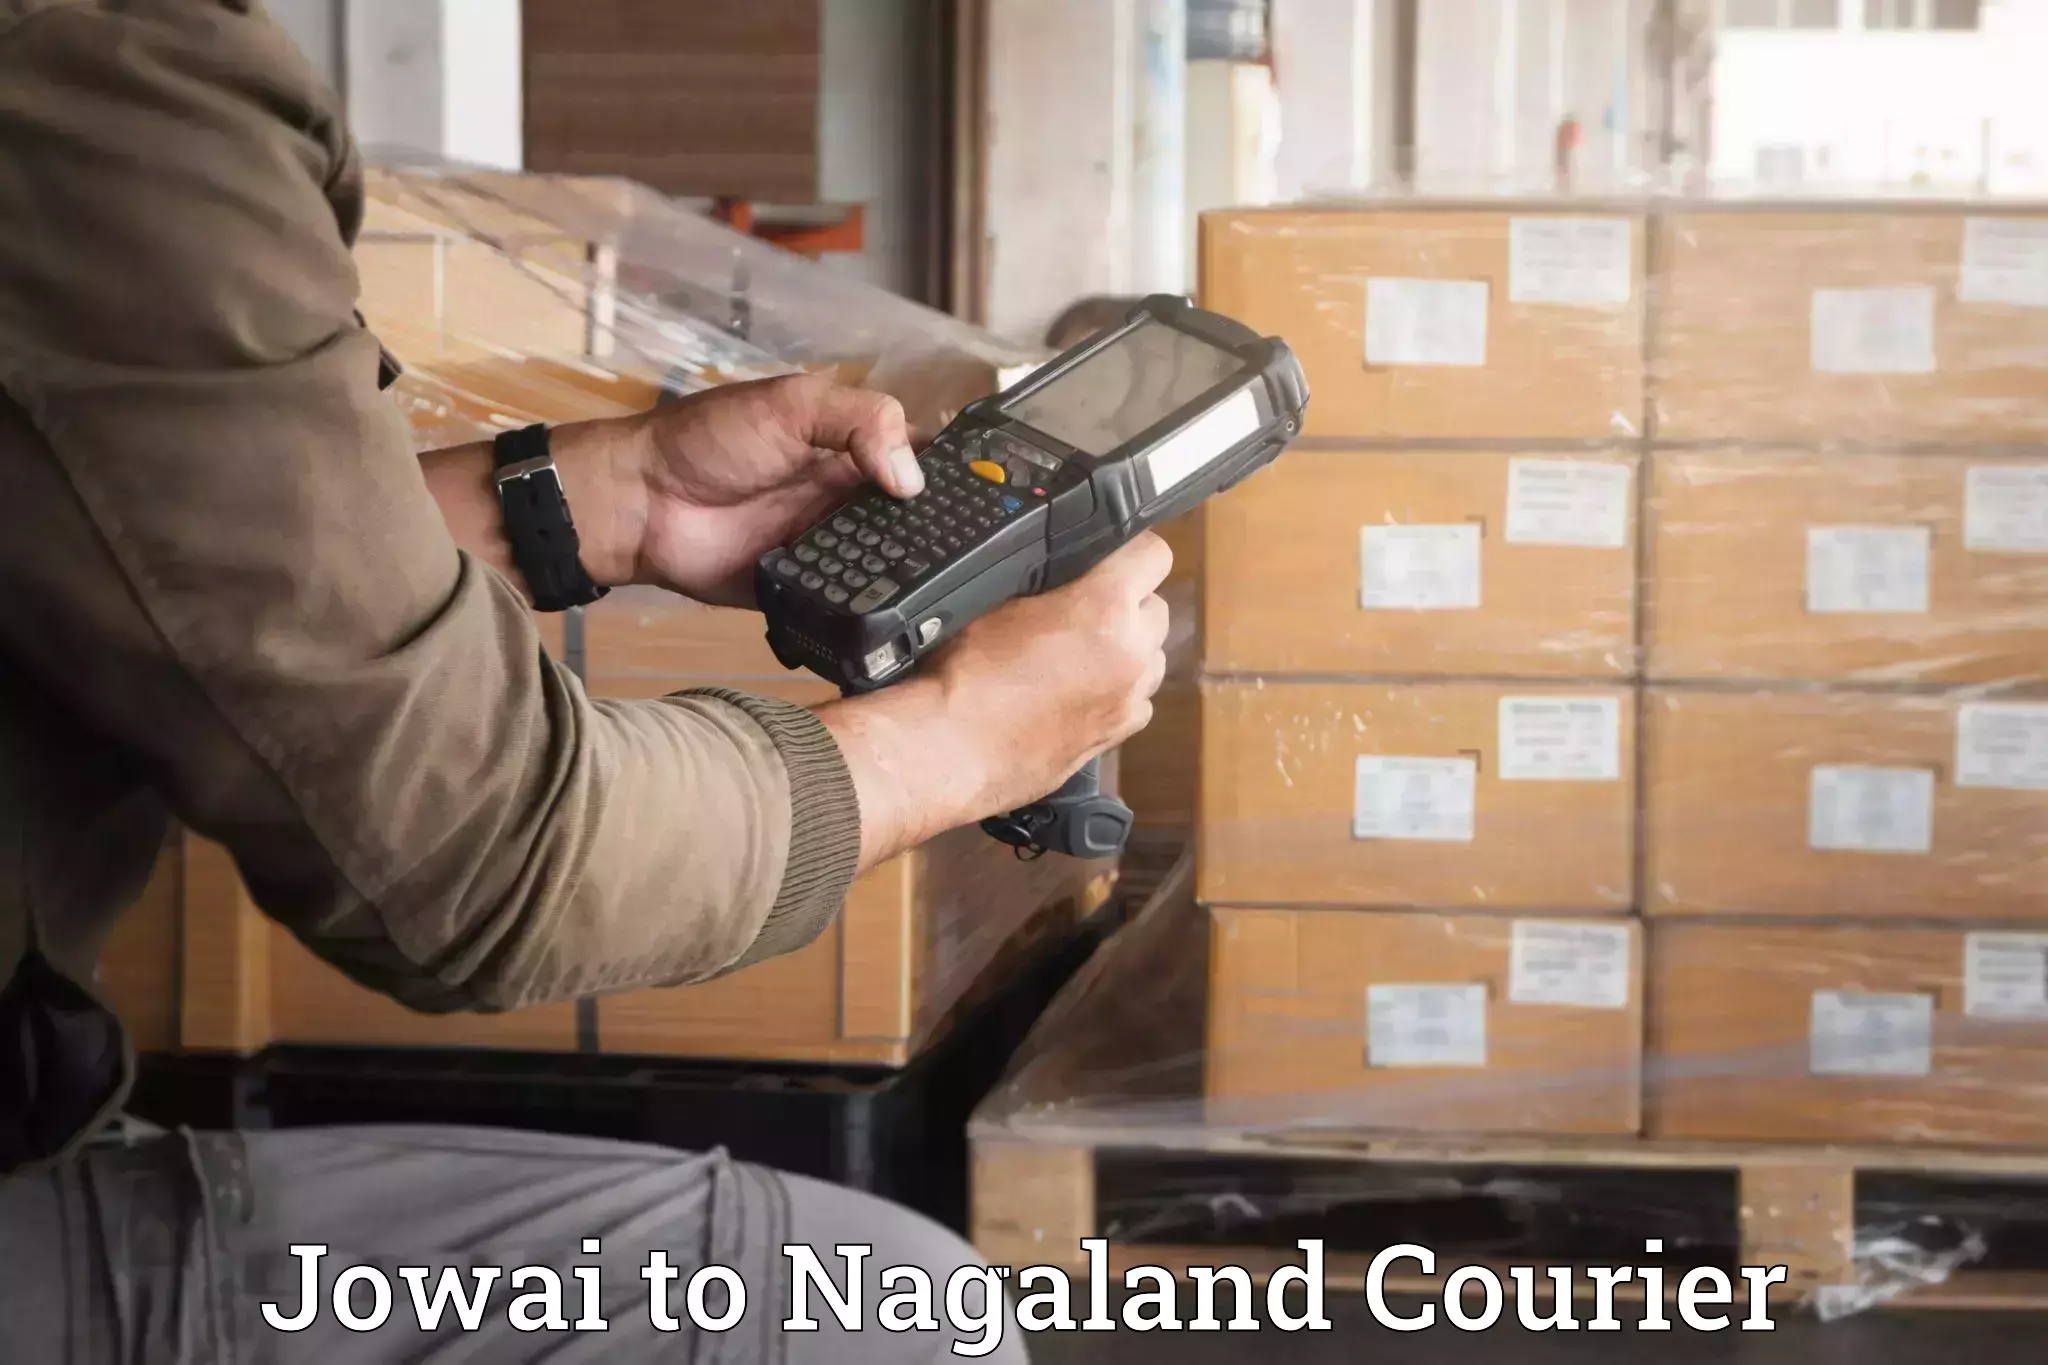 Professional moving assistance in Jowai to Nagaland